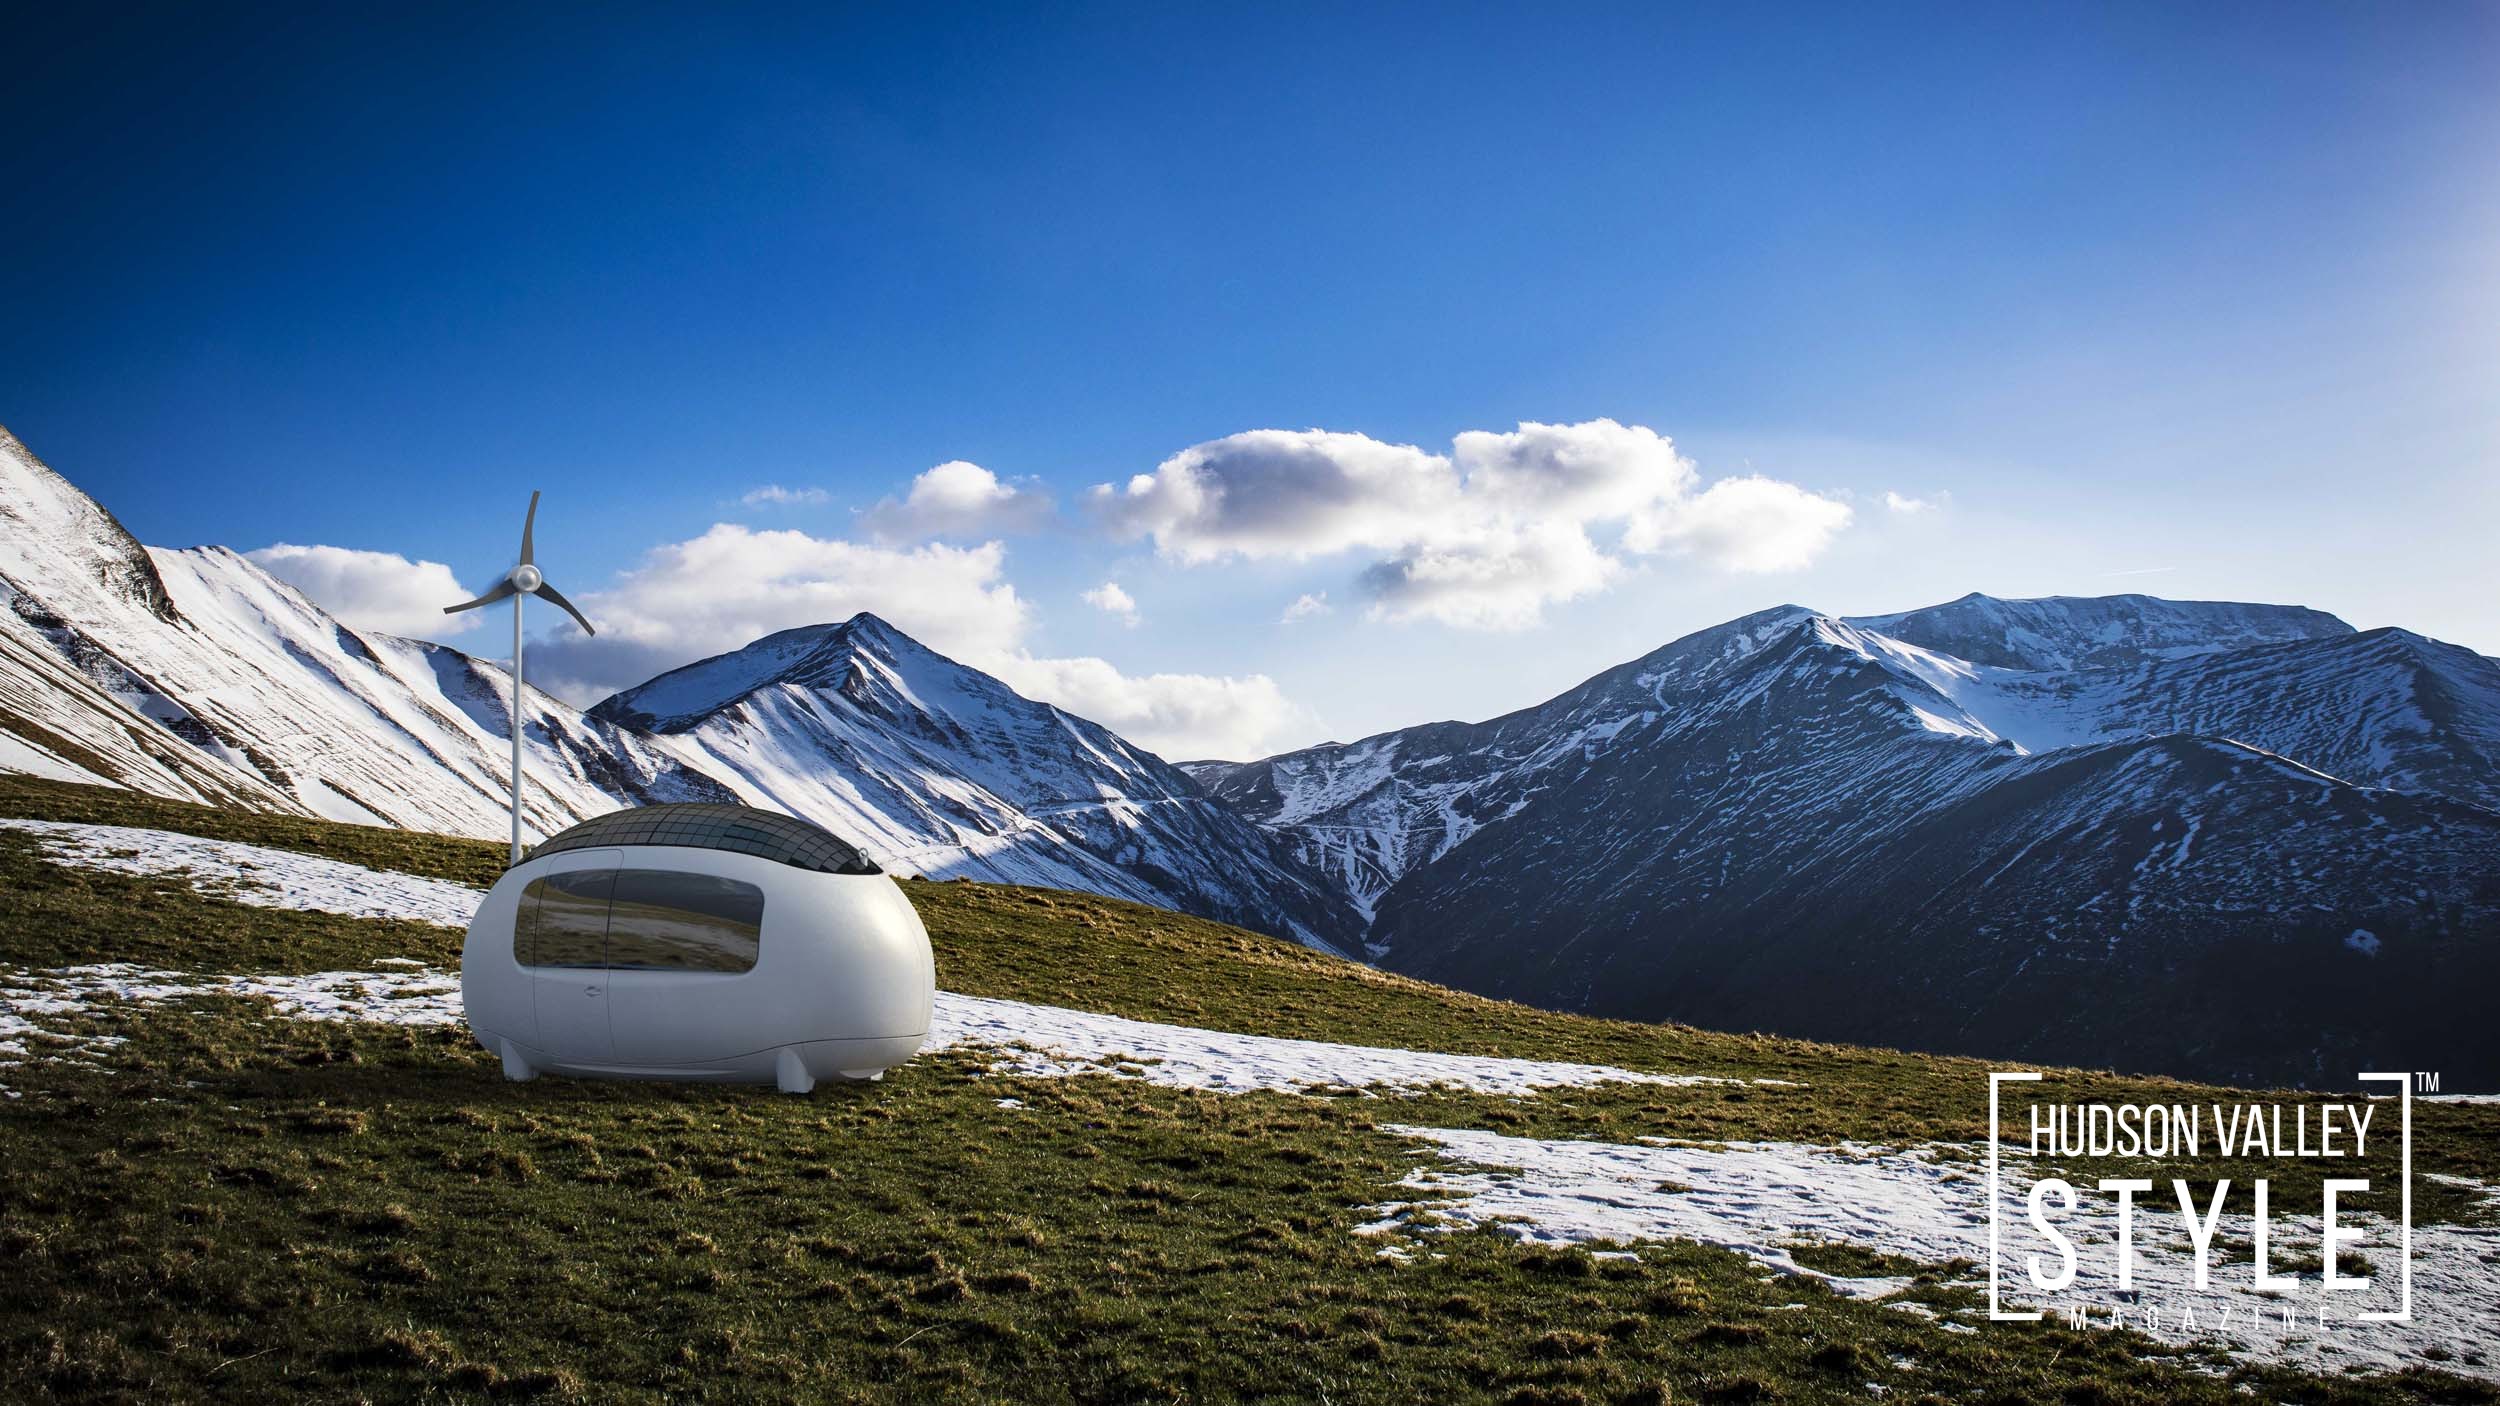 Could European EcoCapsule become a Solution of the Housing Crisis in the United States? Photography © Ecocapsule Holding